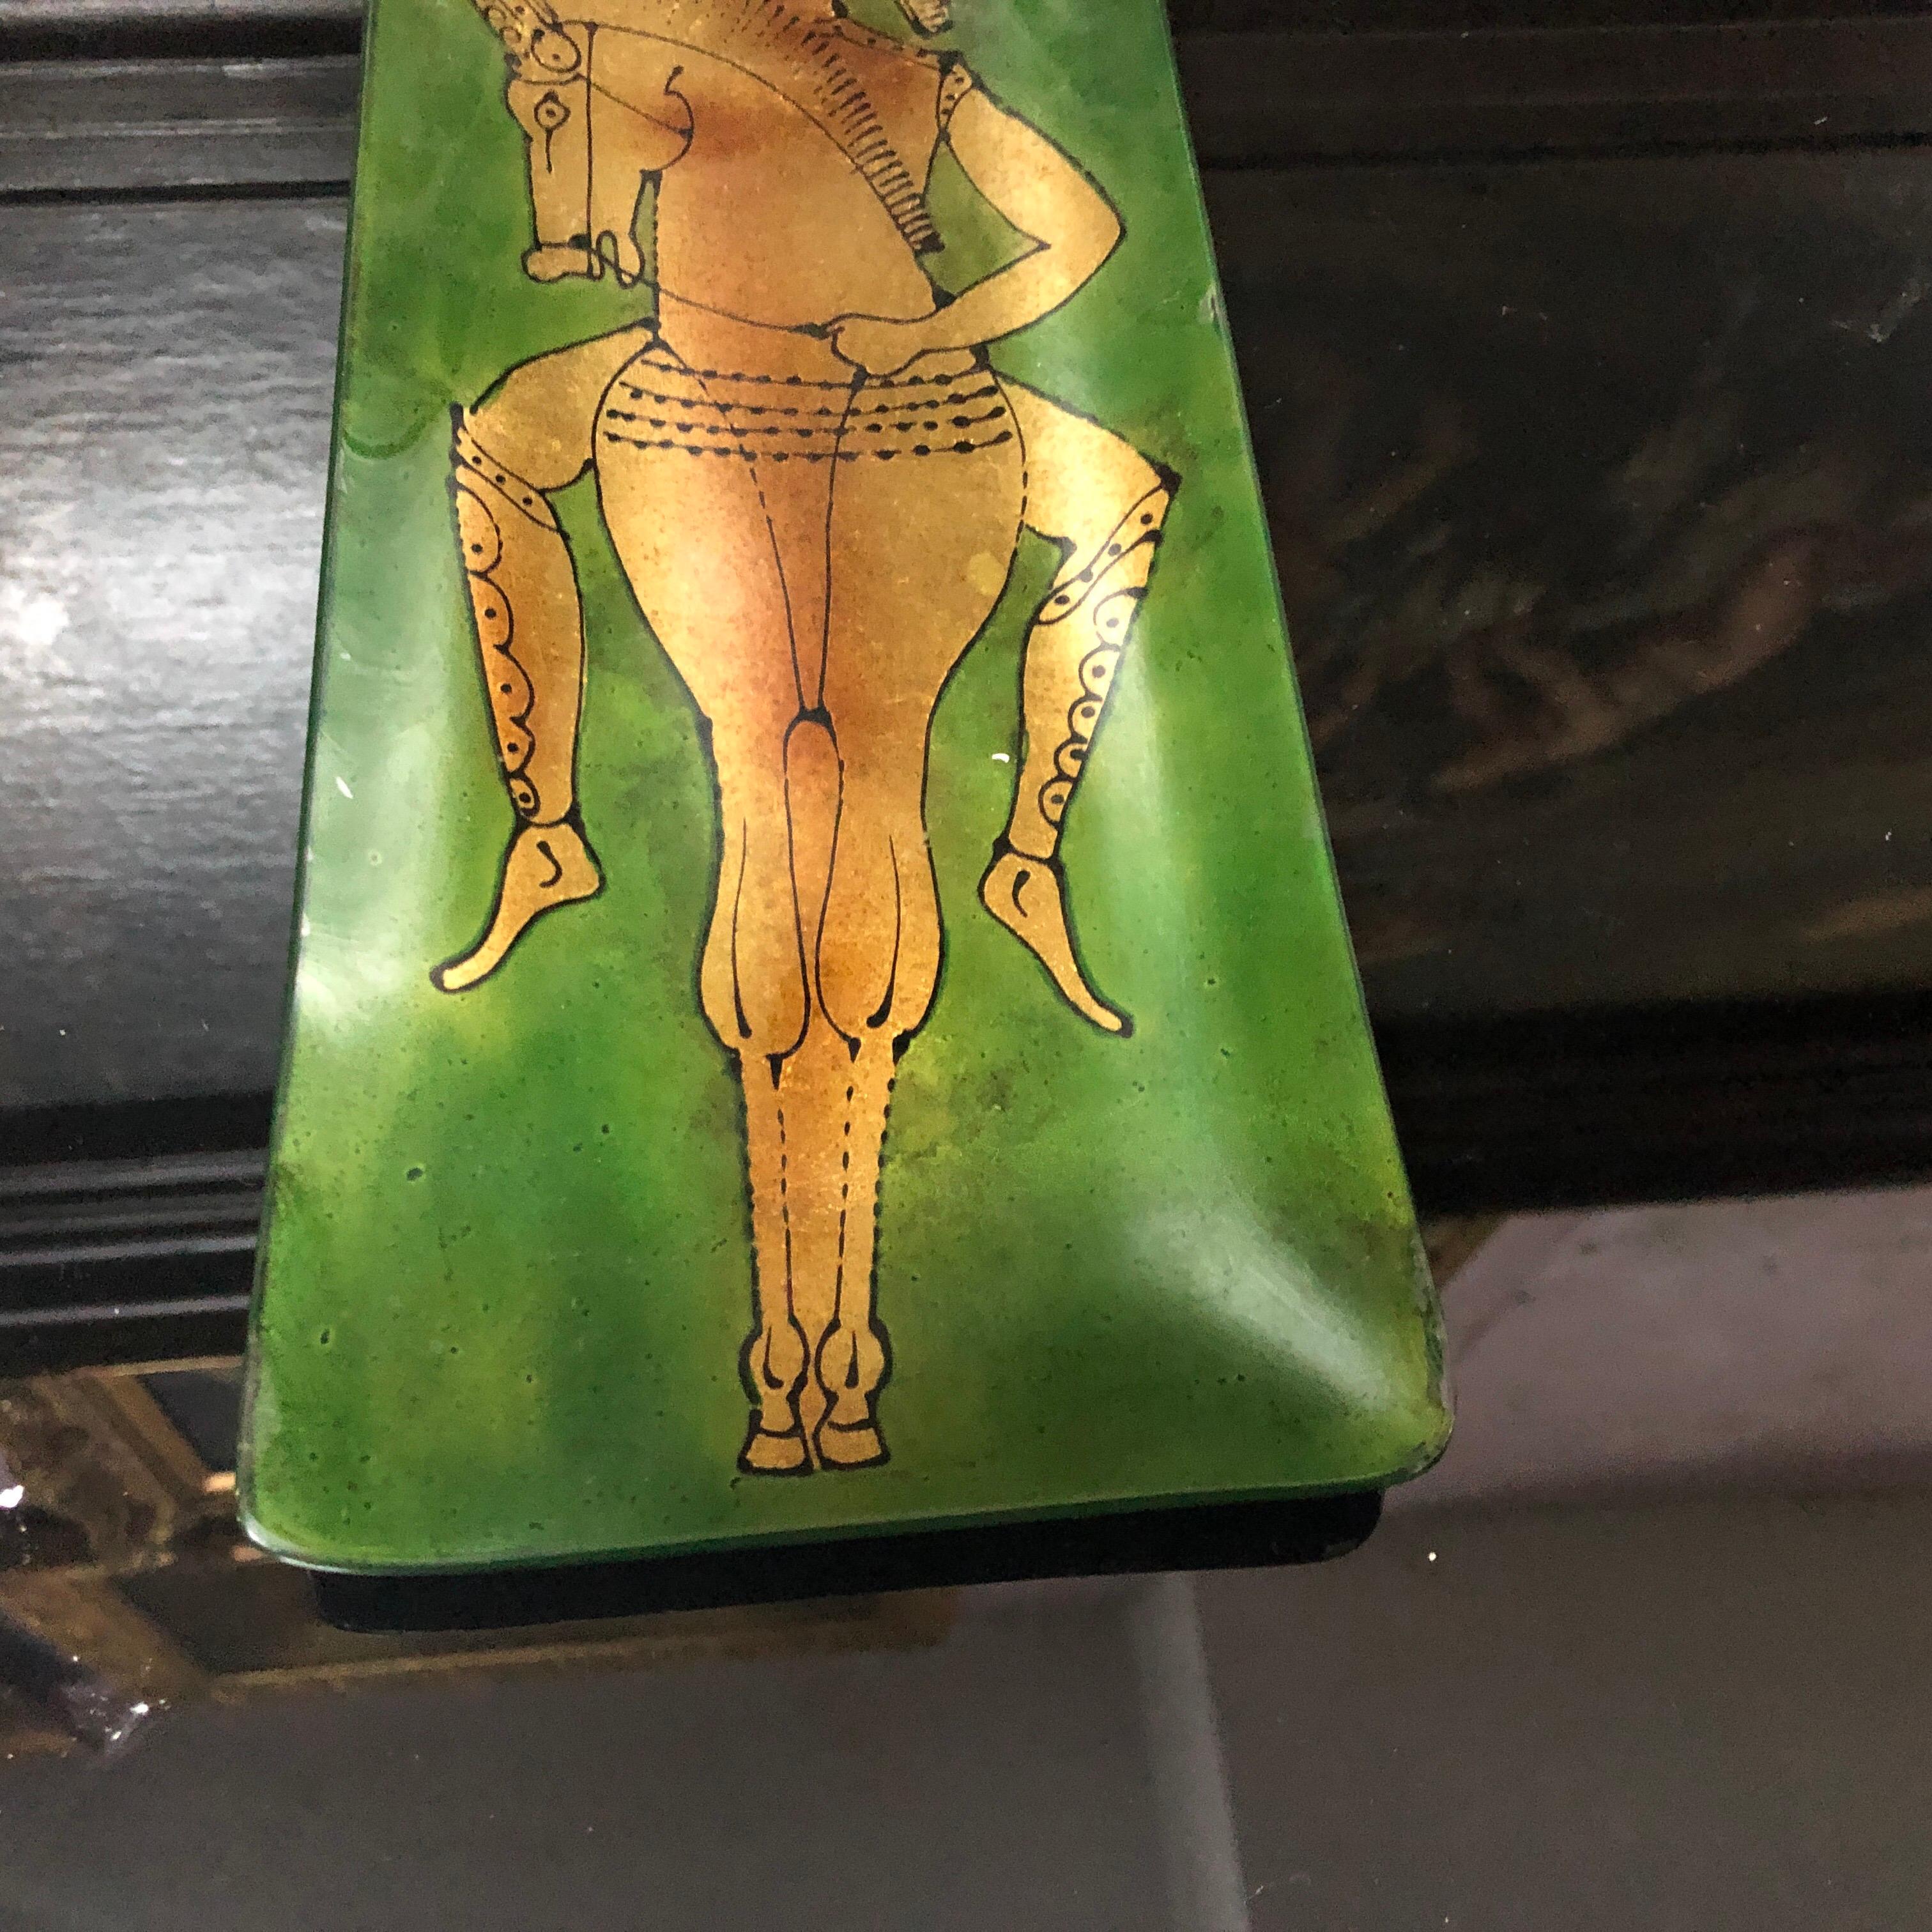 A stylish green enameled copper tray decorated with a gold horse, made in Italy in the 1950s.